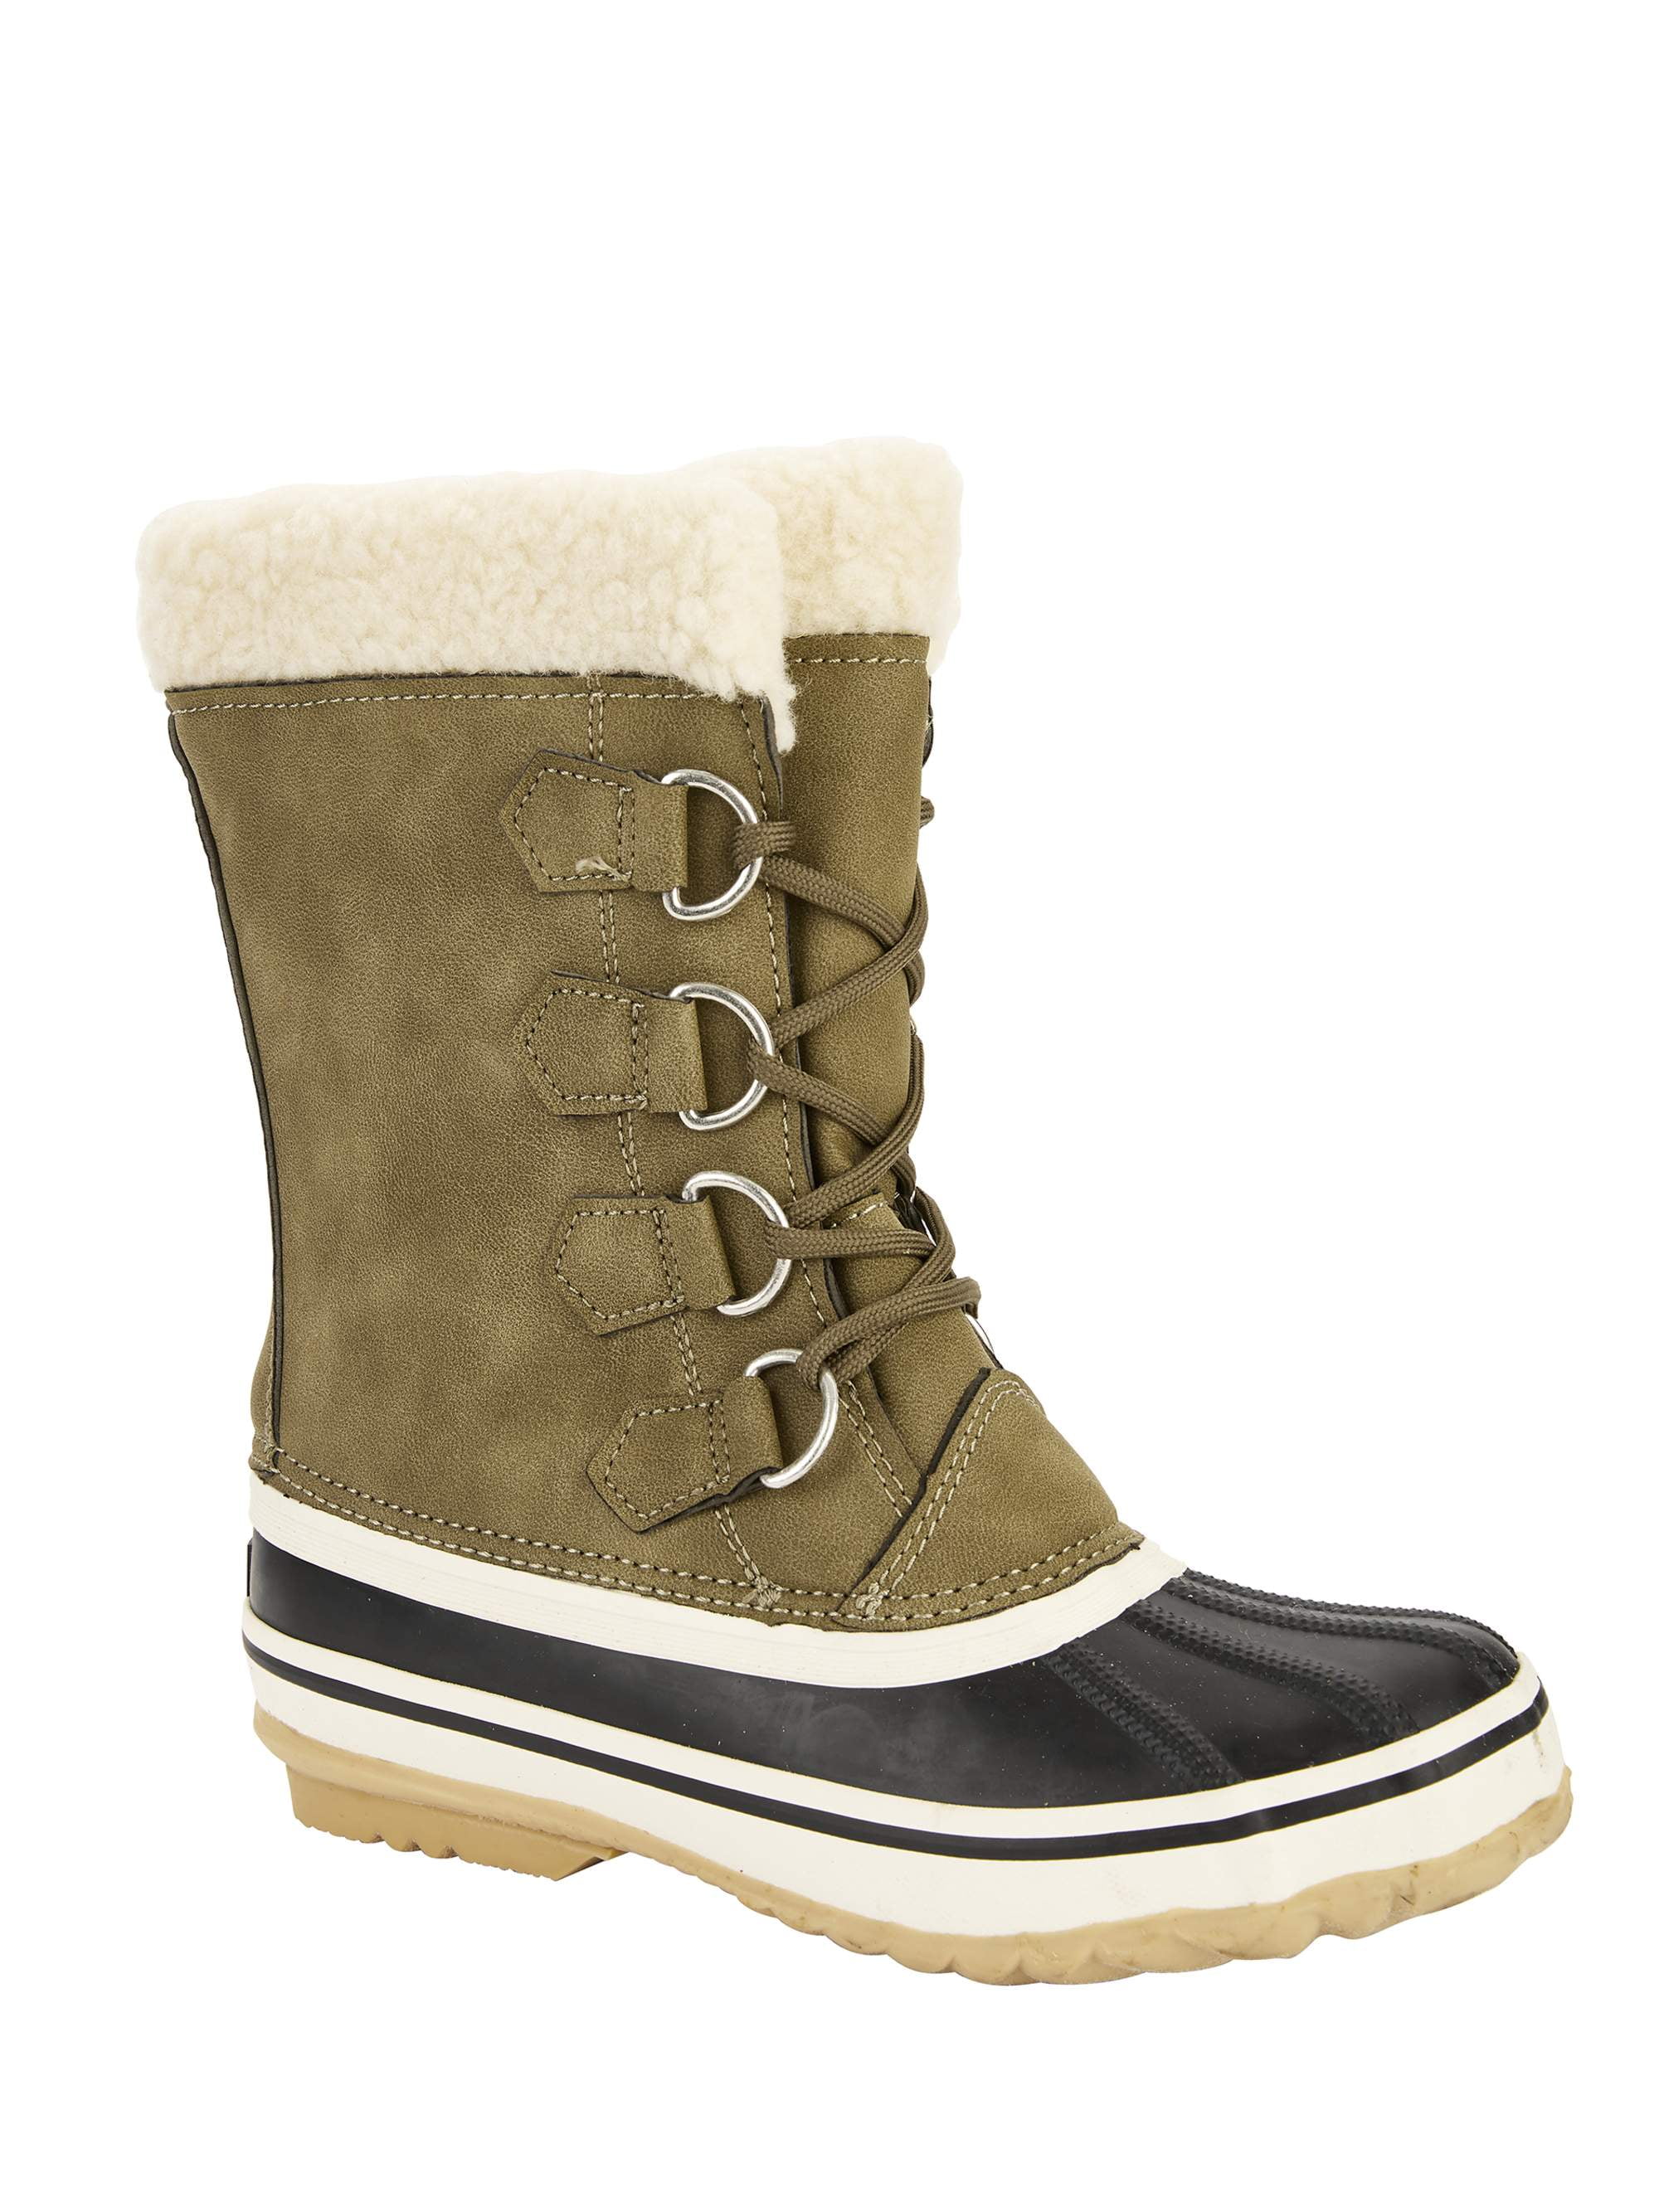 cyber monday womens winter boots